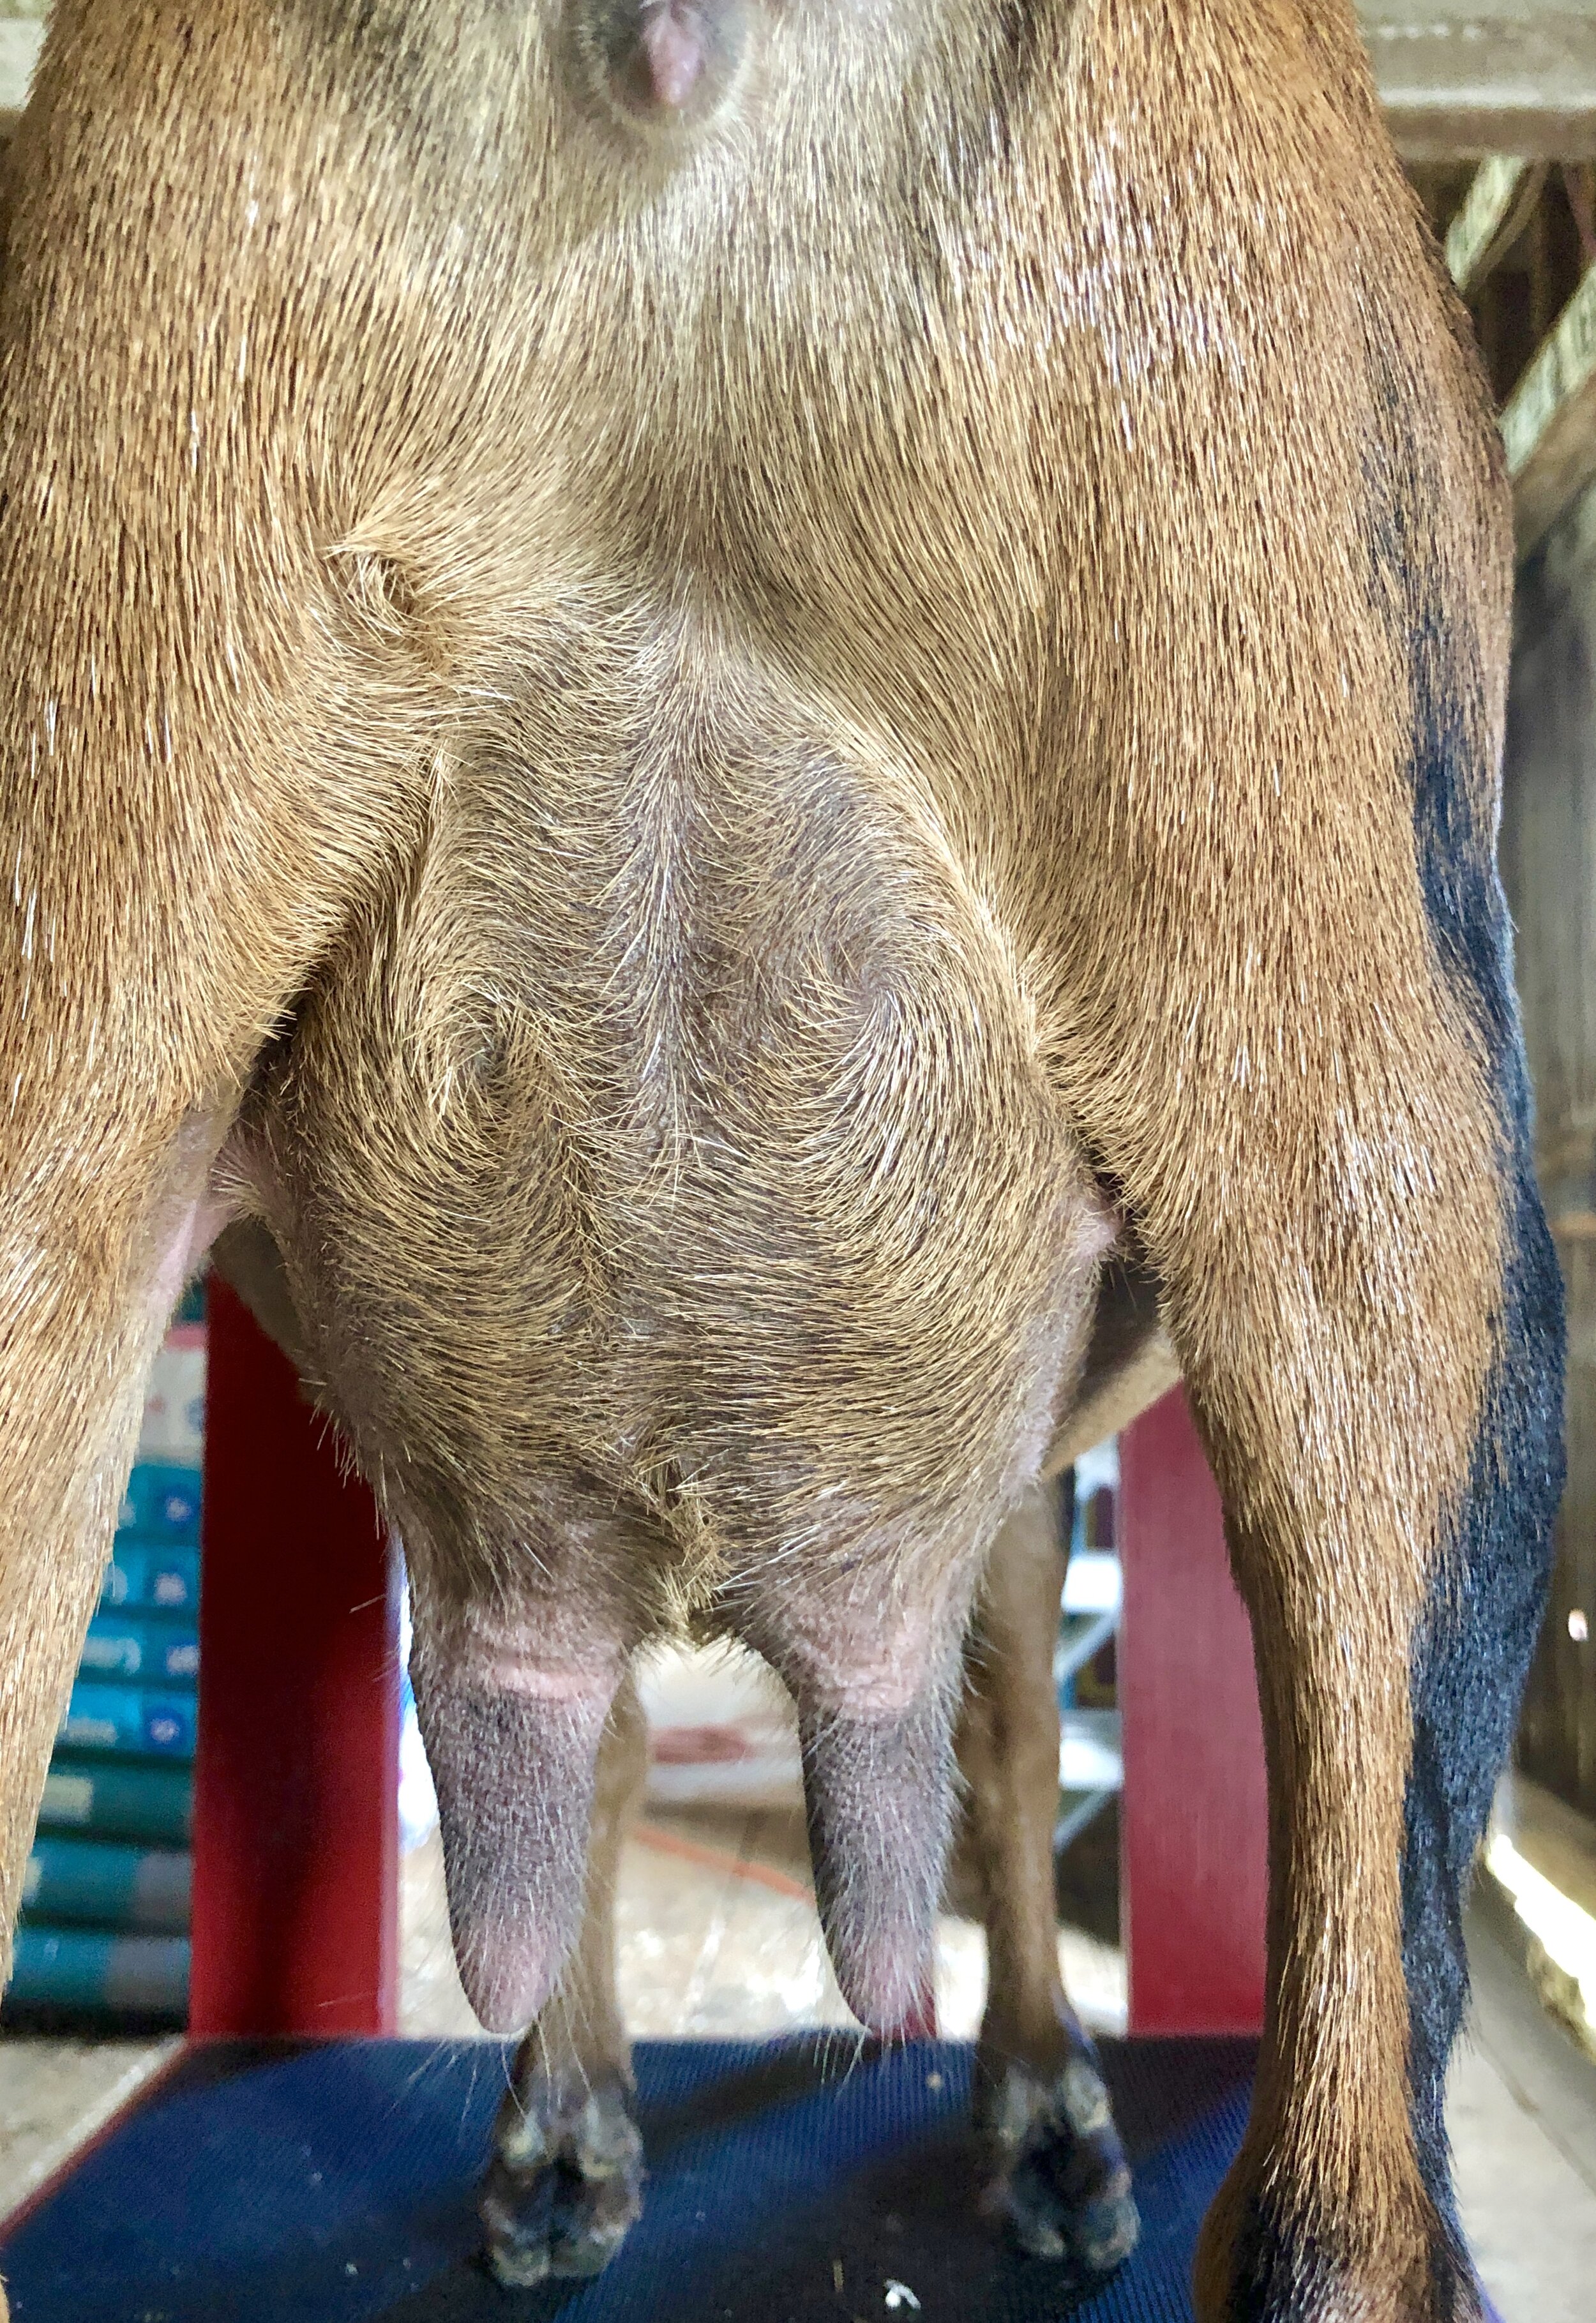 LeeLoni's 3rd fresh udder shown milked out